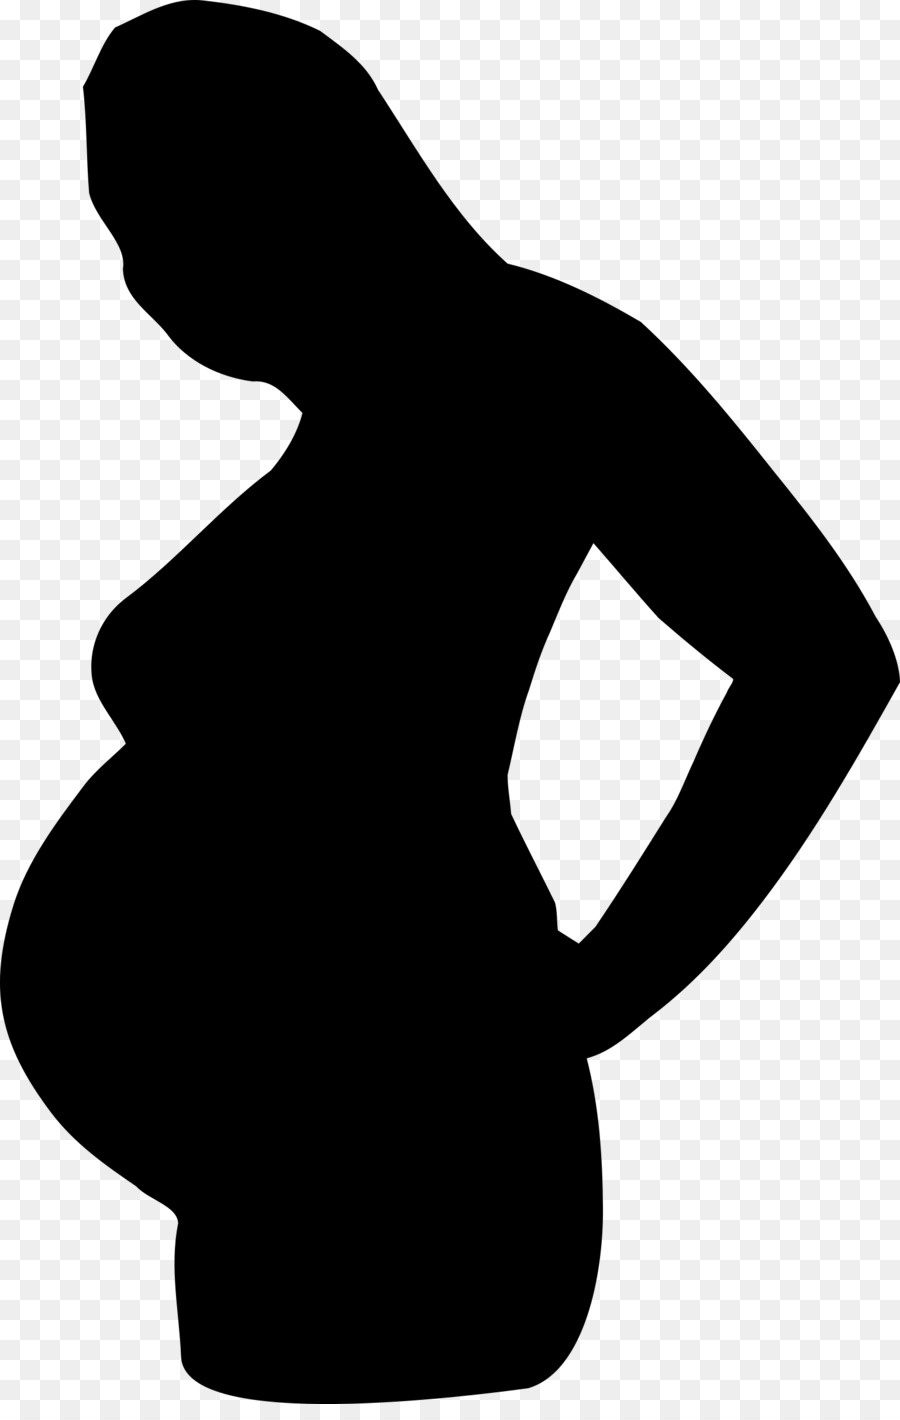 Pregnancy Silhouette Clip art - Pregnancy PNG Free Download png download - 1539*2400 - Free Transparent Pregnancy png Download.